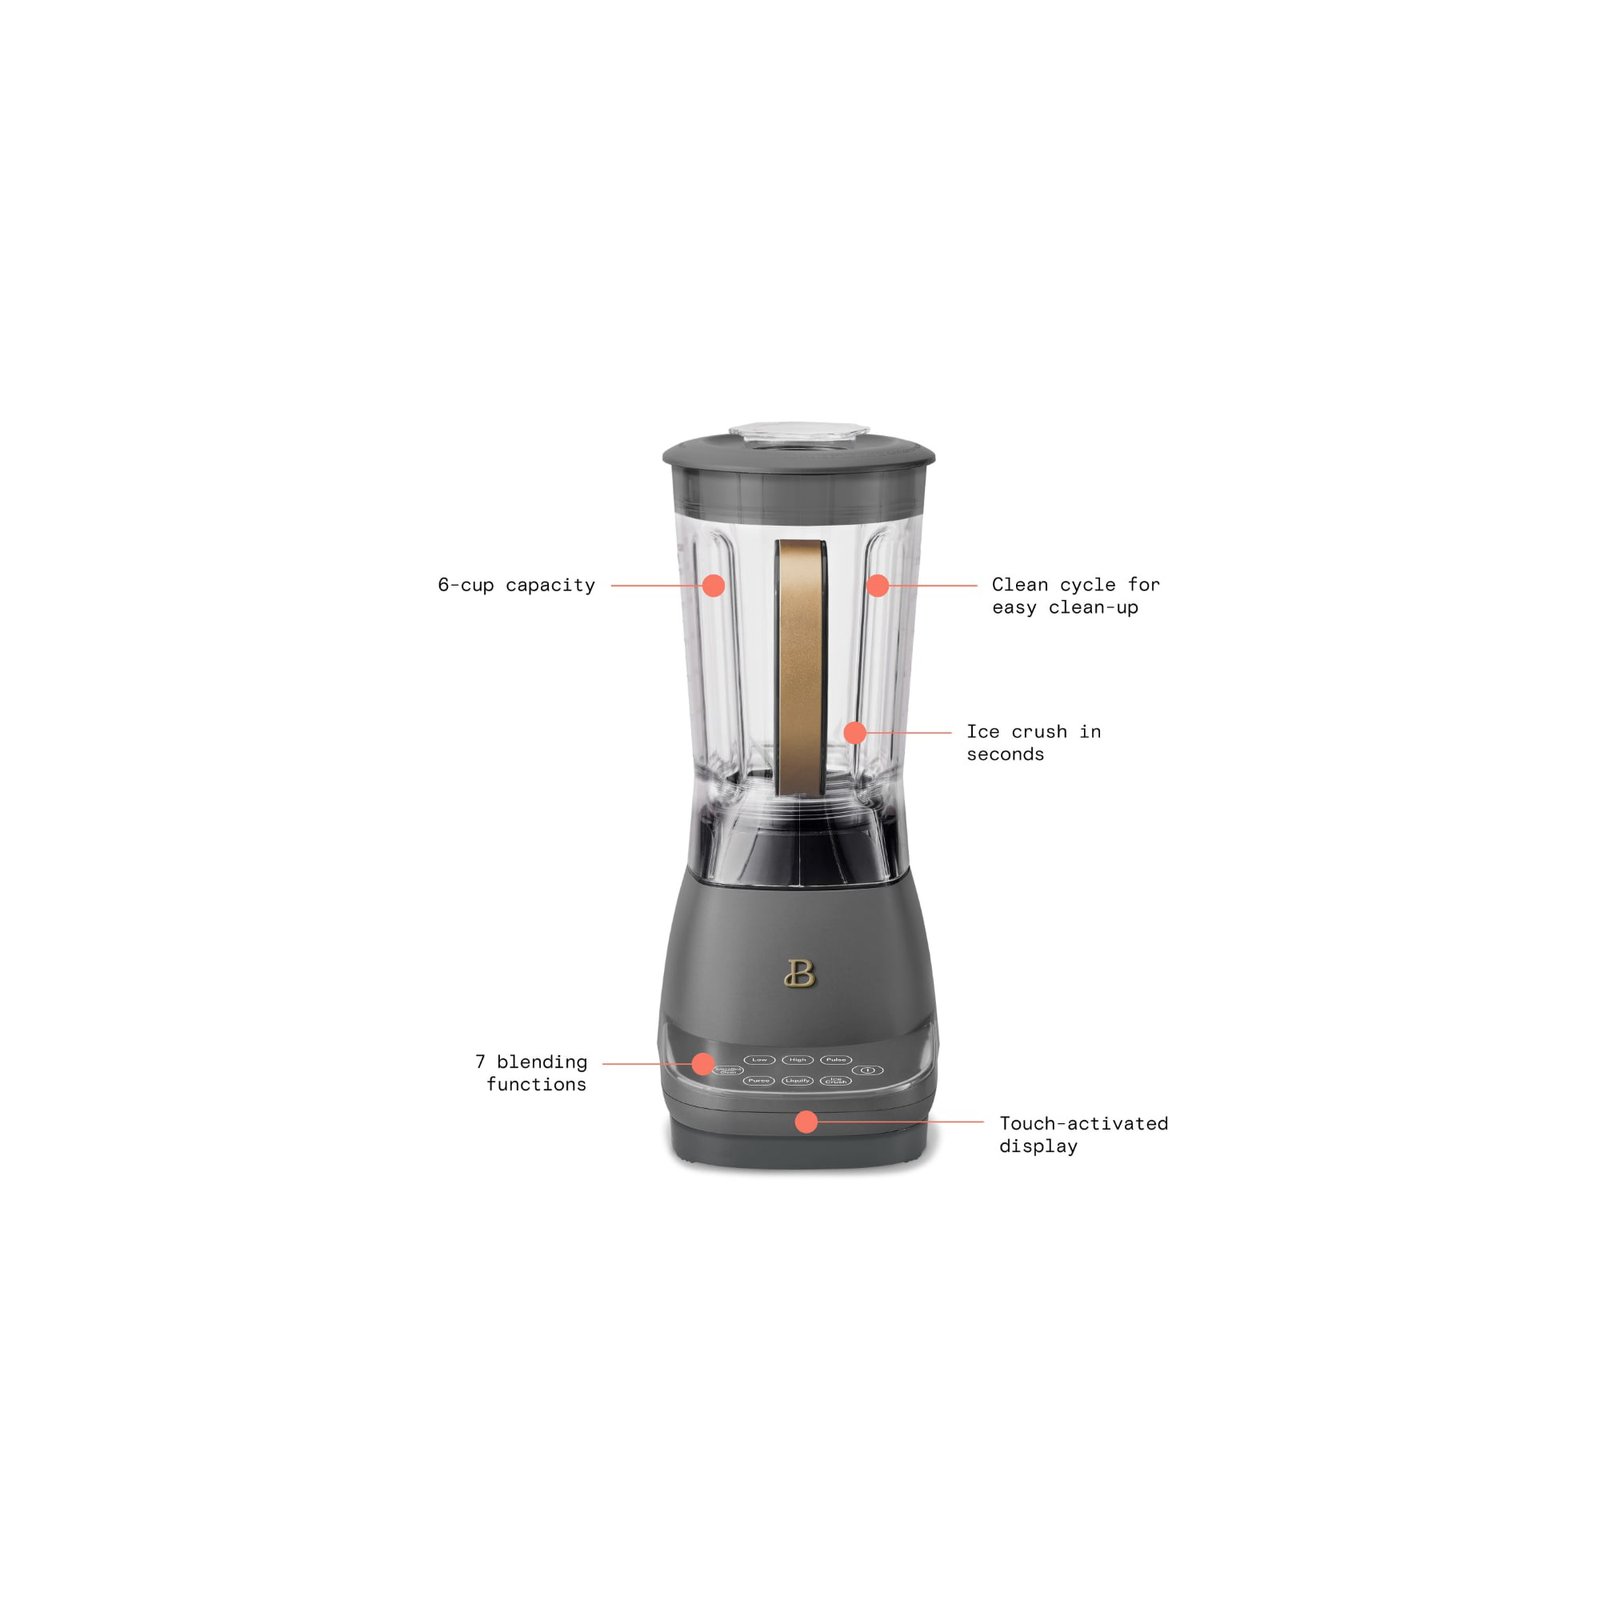 https://themarketdepot.com/wp-content/uploads/2023/01/Oster-6-Cup-Blender-Easy-to-Clean-Smoothie-Blender-in-Black-9.jpeg